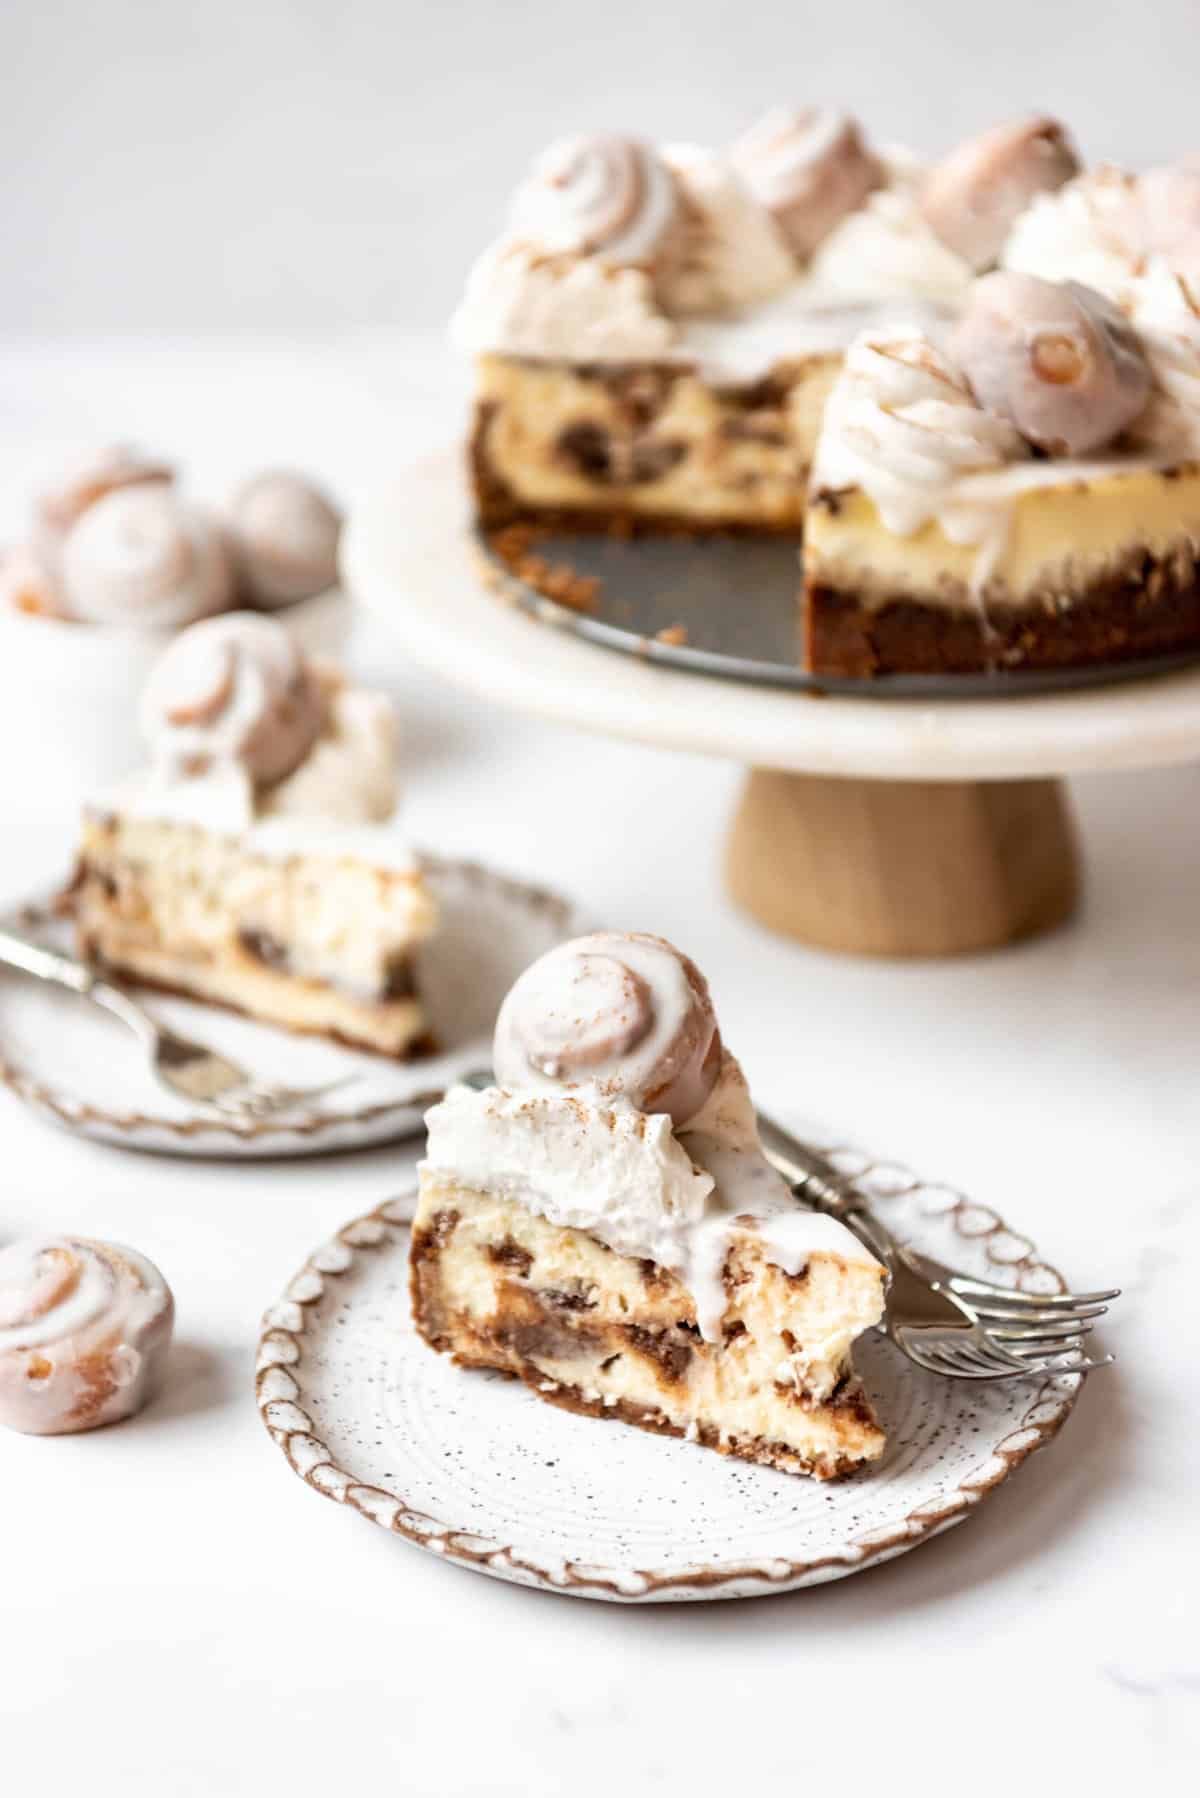 Slices of cinnamon roll cheesecake in front of the rest of the cheesecake on a cake stand in the background.